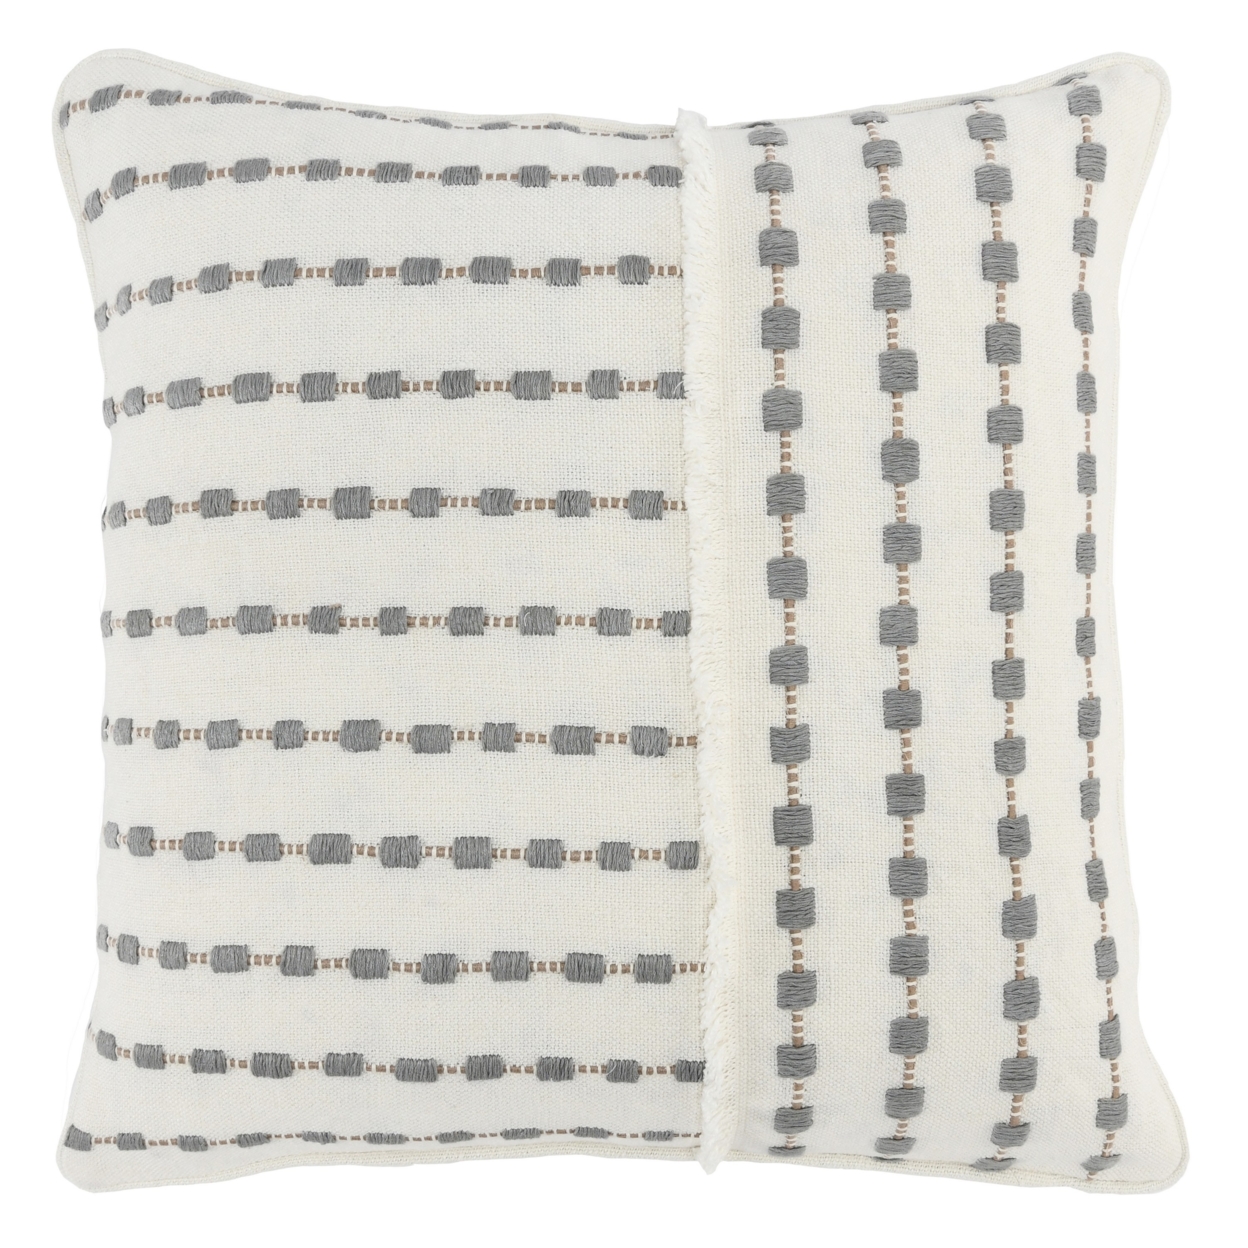 Embroidered Square Fabric Throw Pillow, White And Gray- Saltoro Sherpi